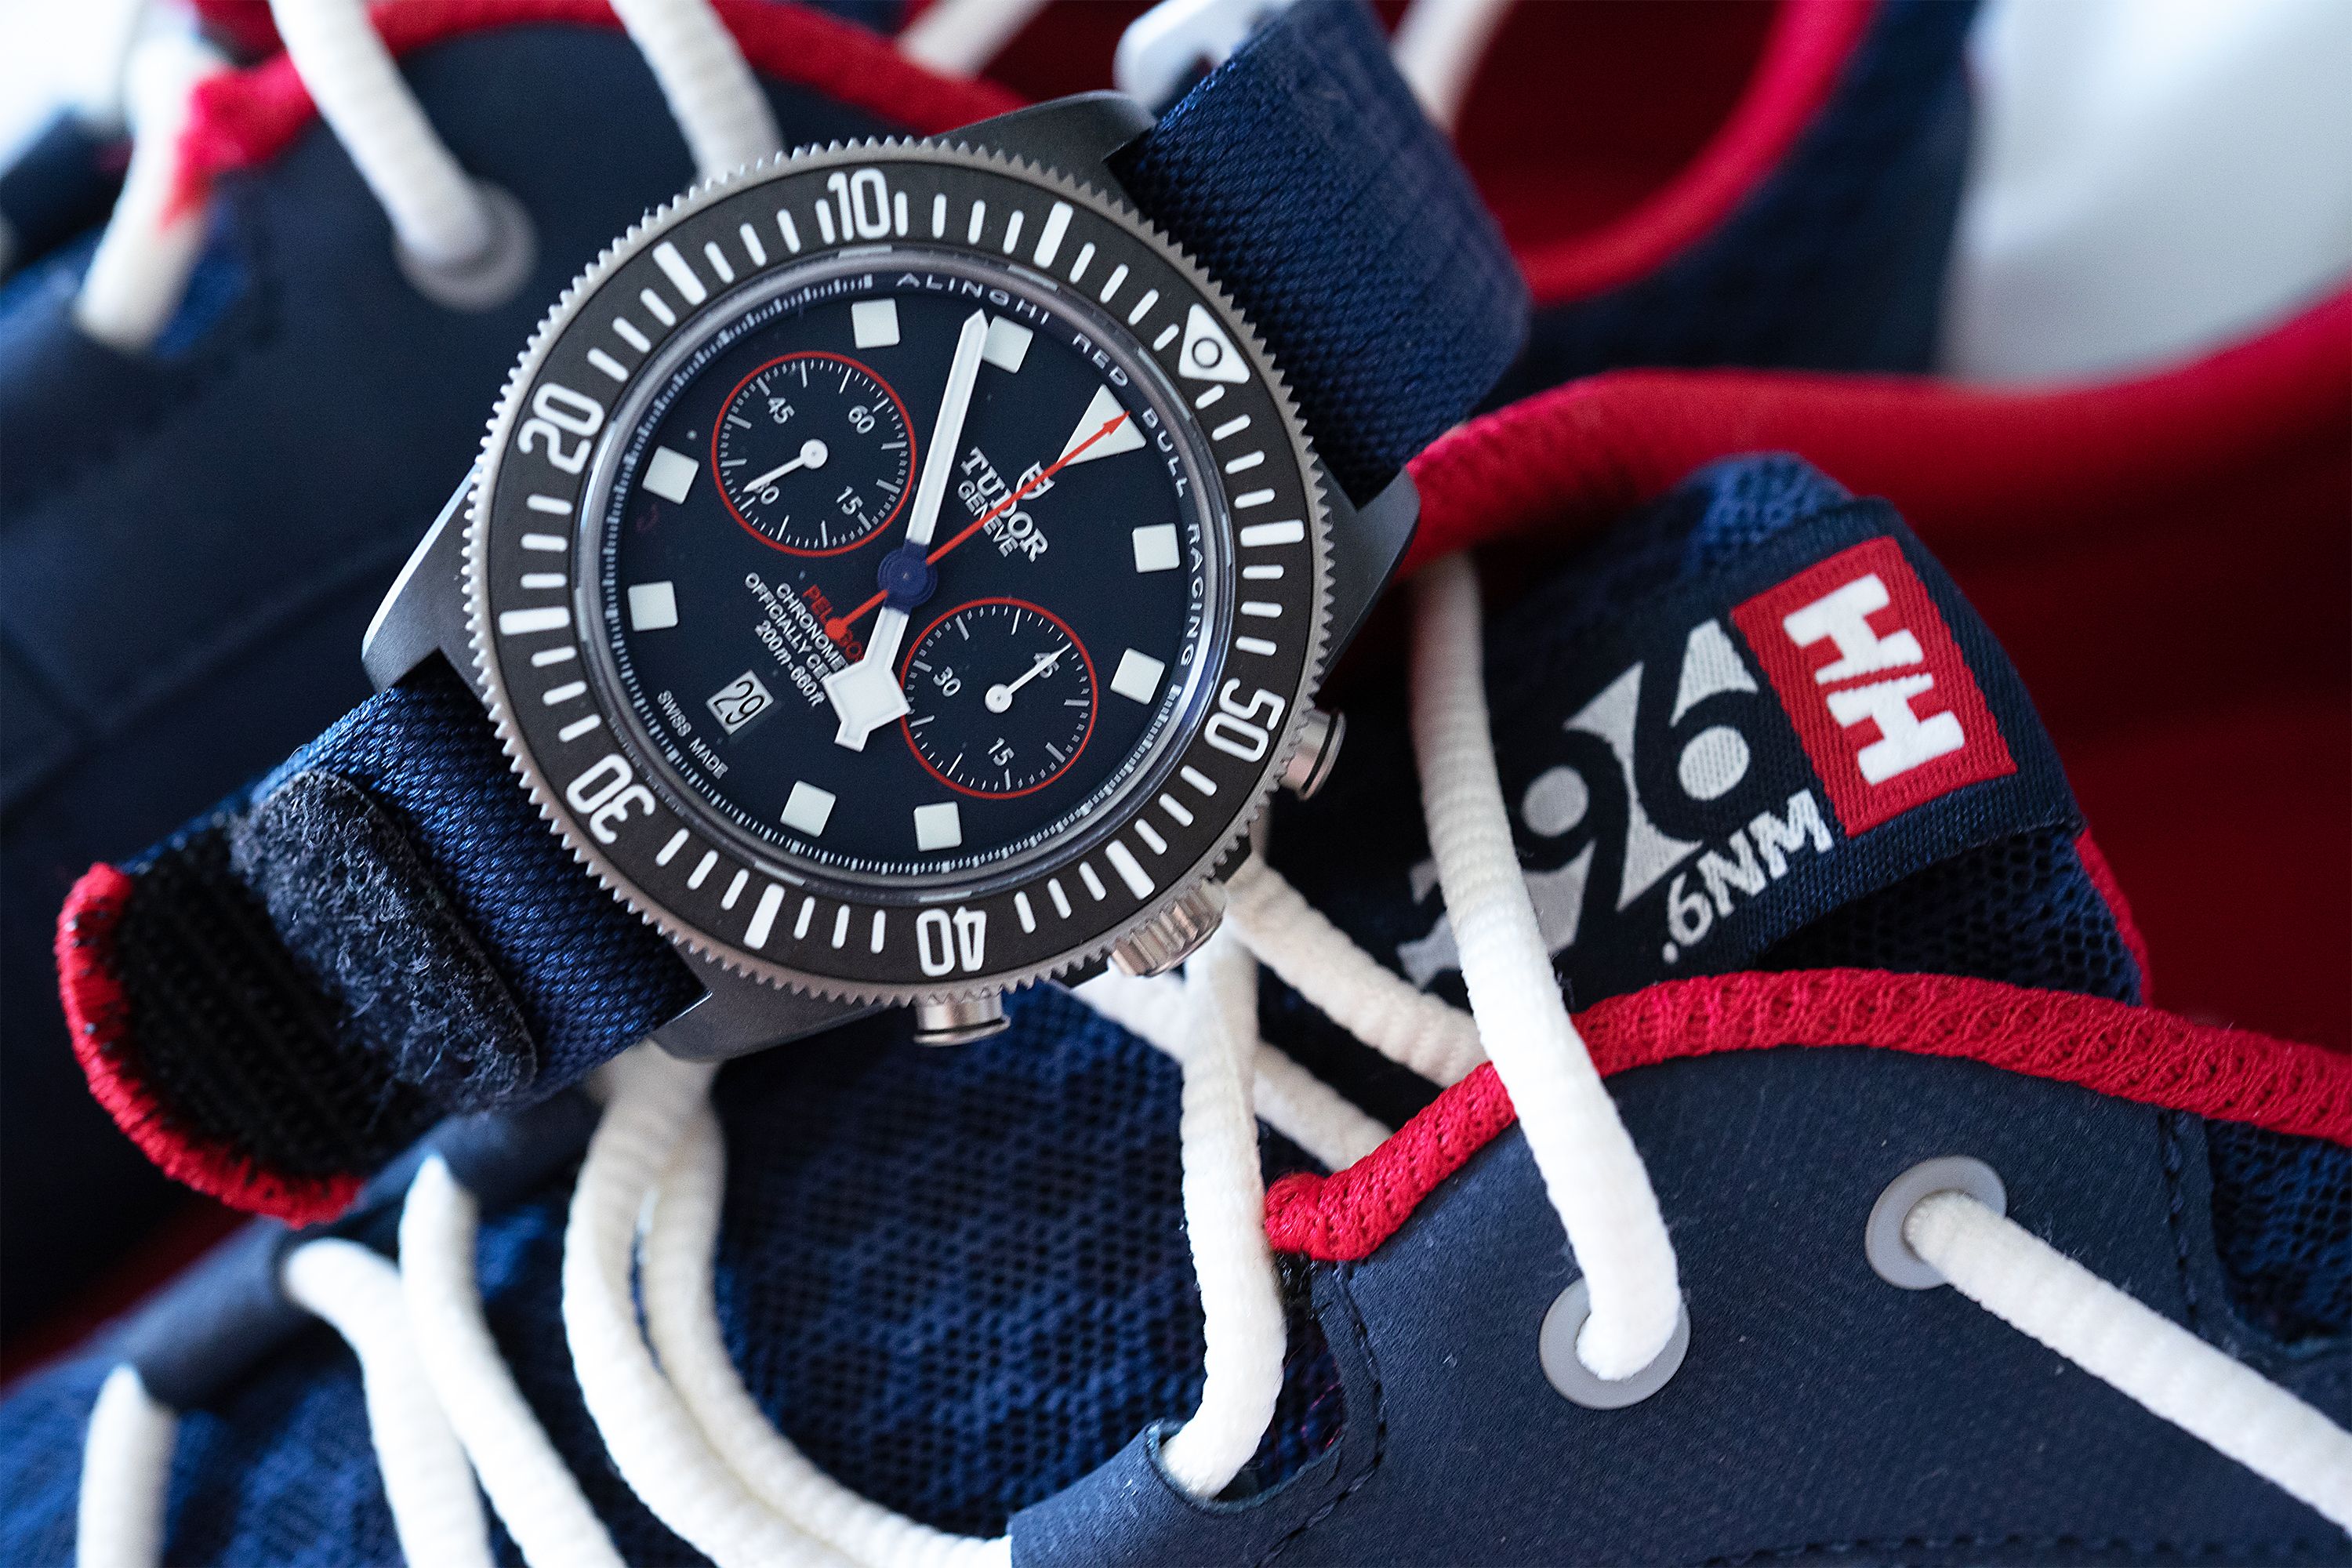 Why Tudor's First Carbon Are for Professional Yacht Racing